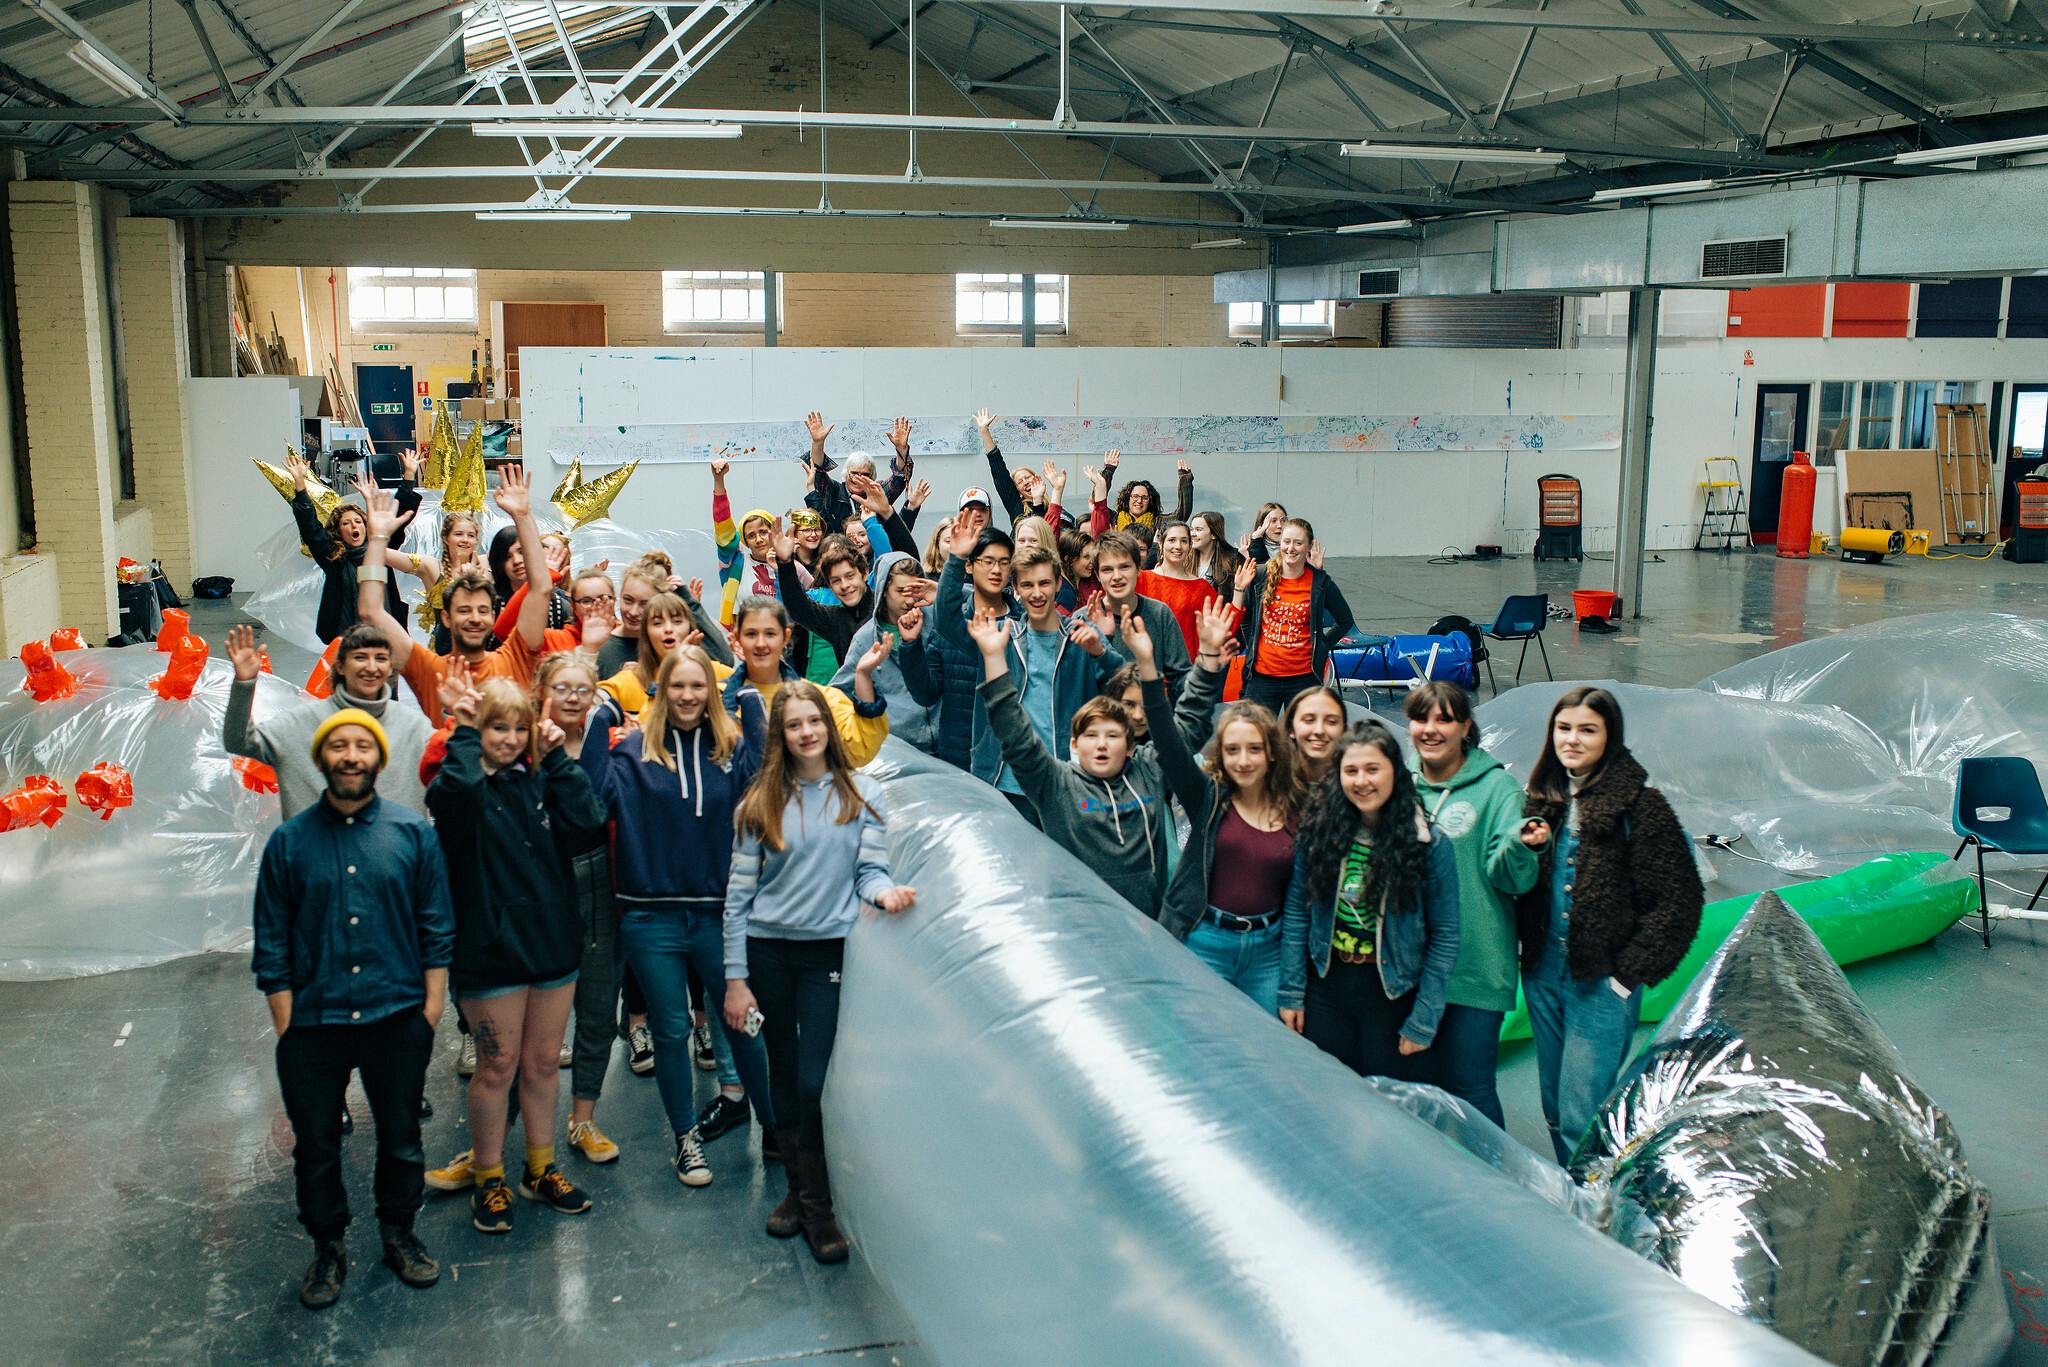 A large class of school-age students pose for a photo in an industrial-looking warehouse with inflatable installations.